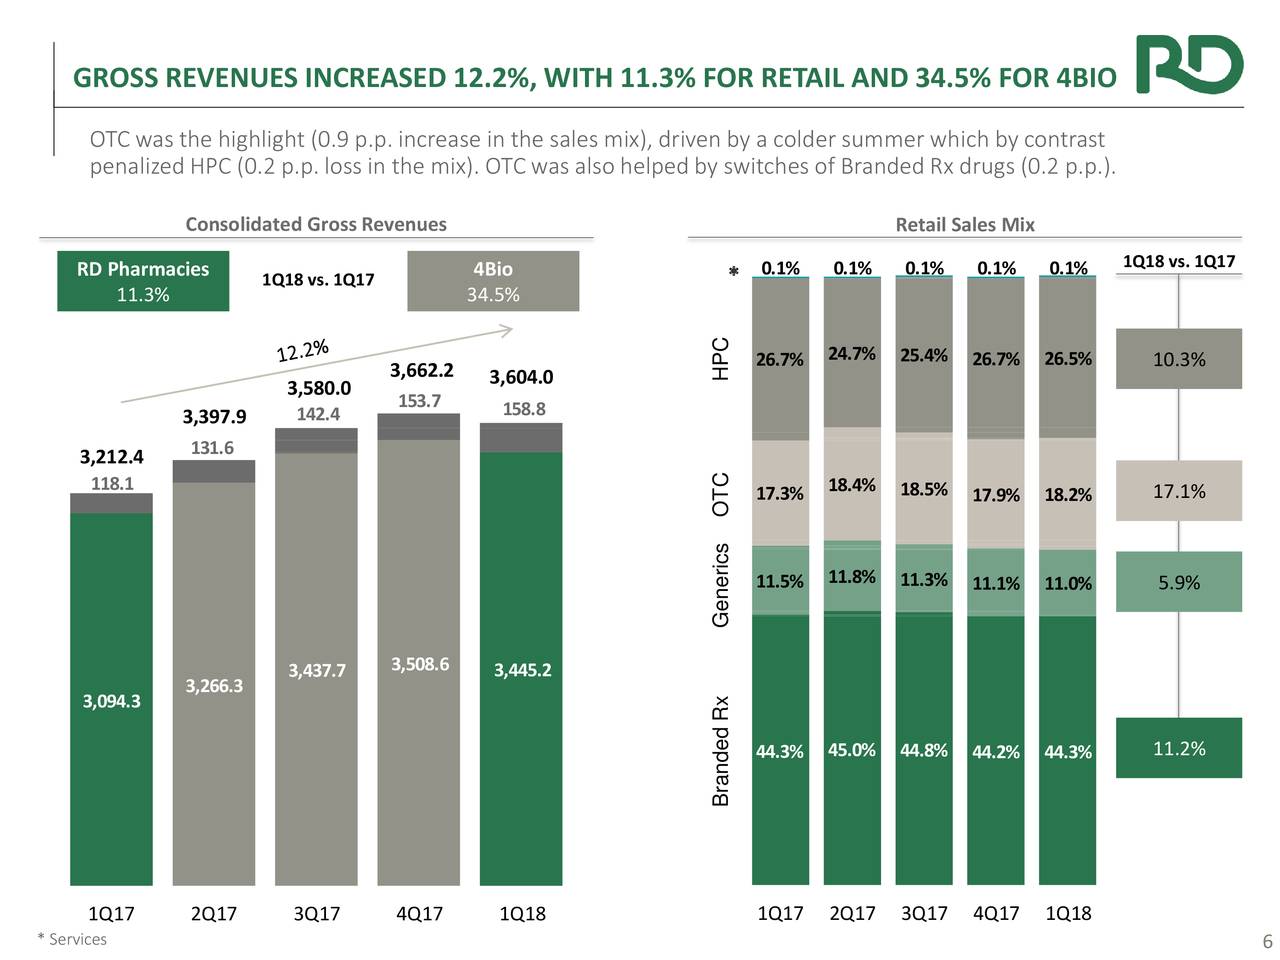 GROSS REVENUES INCREASED 12.2%, WITH 11.3% FOR RETAIL AND 34.5% FOR 4BIO